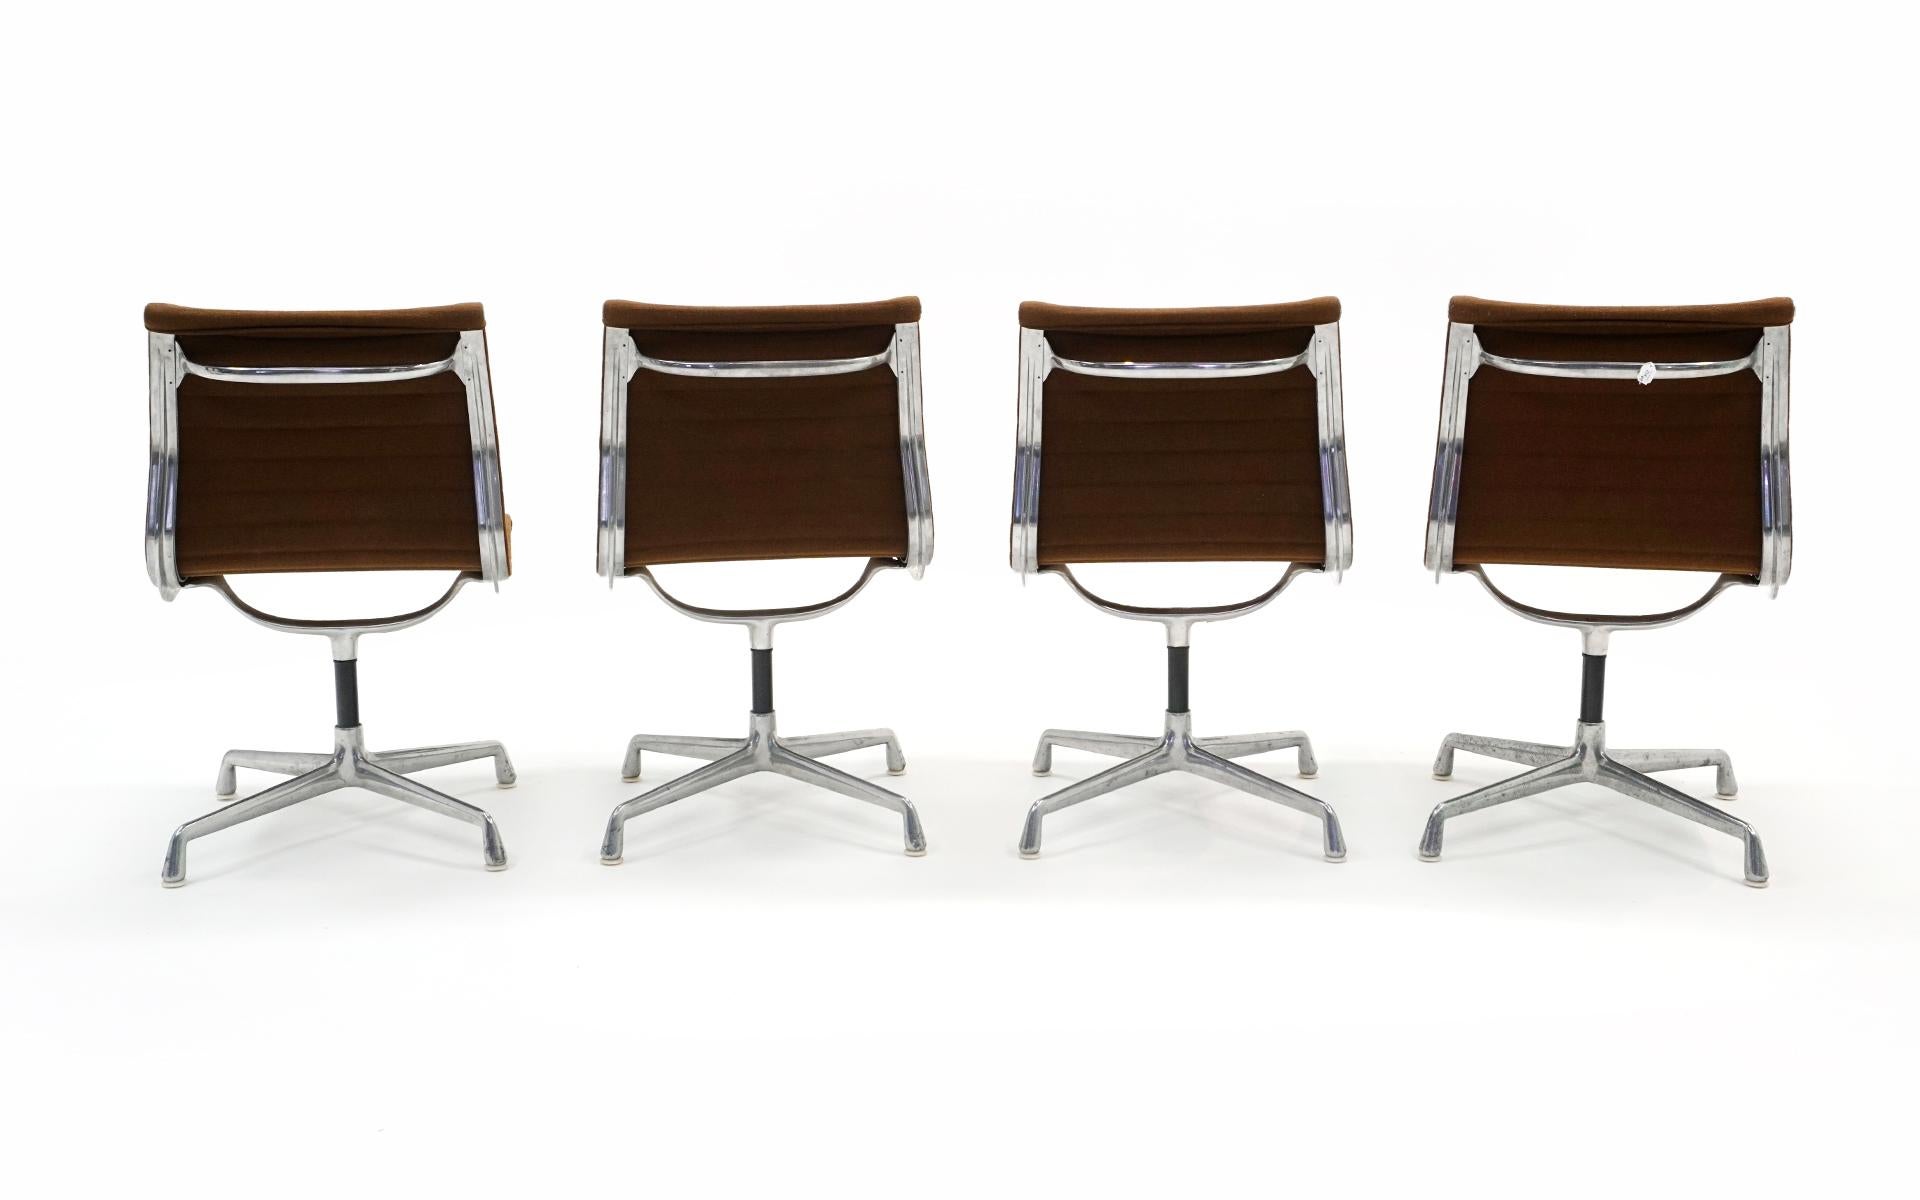 Late 20th Century Charles & Ray Eames Armless Aluminum Group Swivel Chairs. Aluminum, Brown Fabric